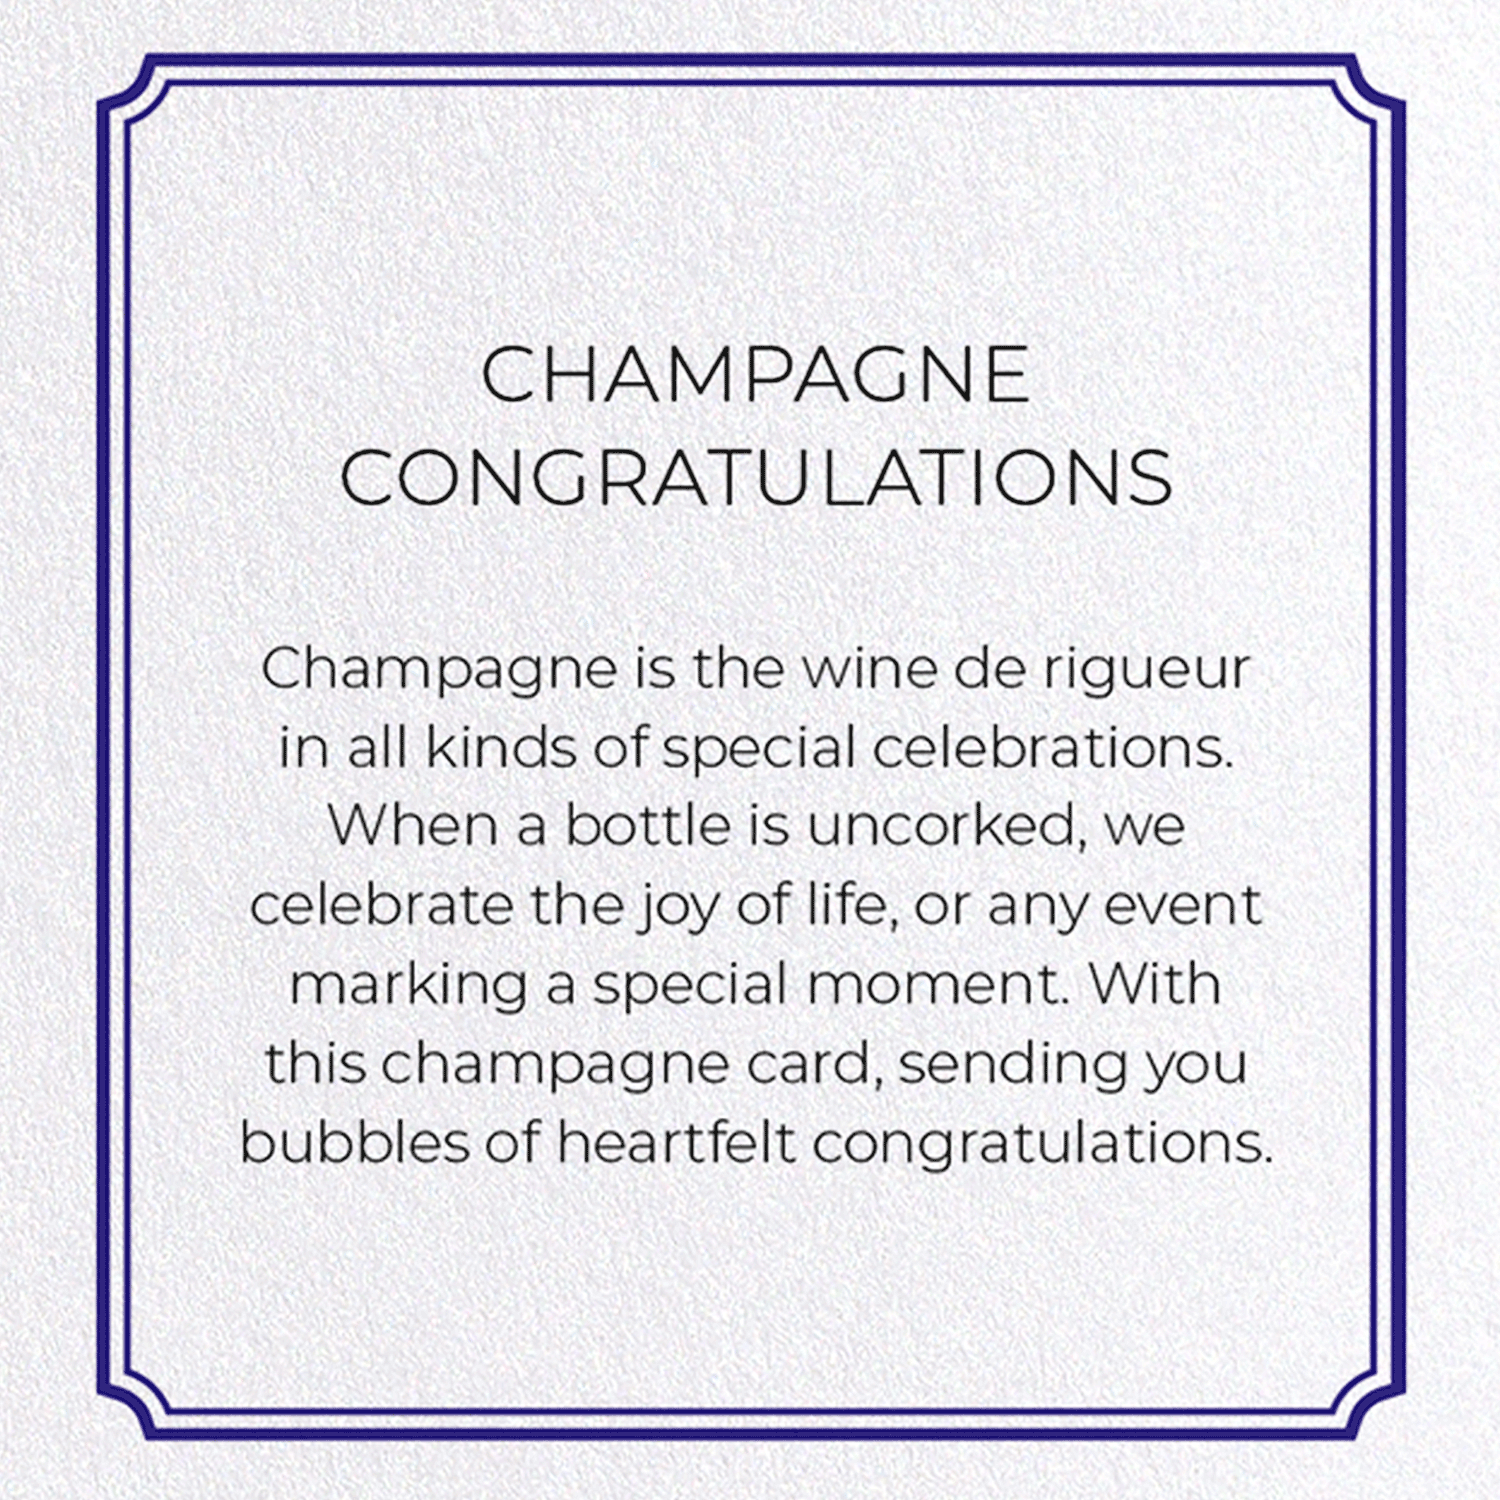 CHAMPAGNE CONGRATULATIONS: Vintage Greeting Card